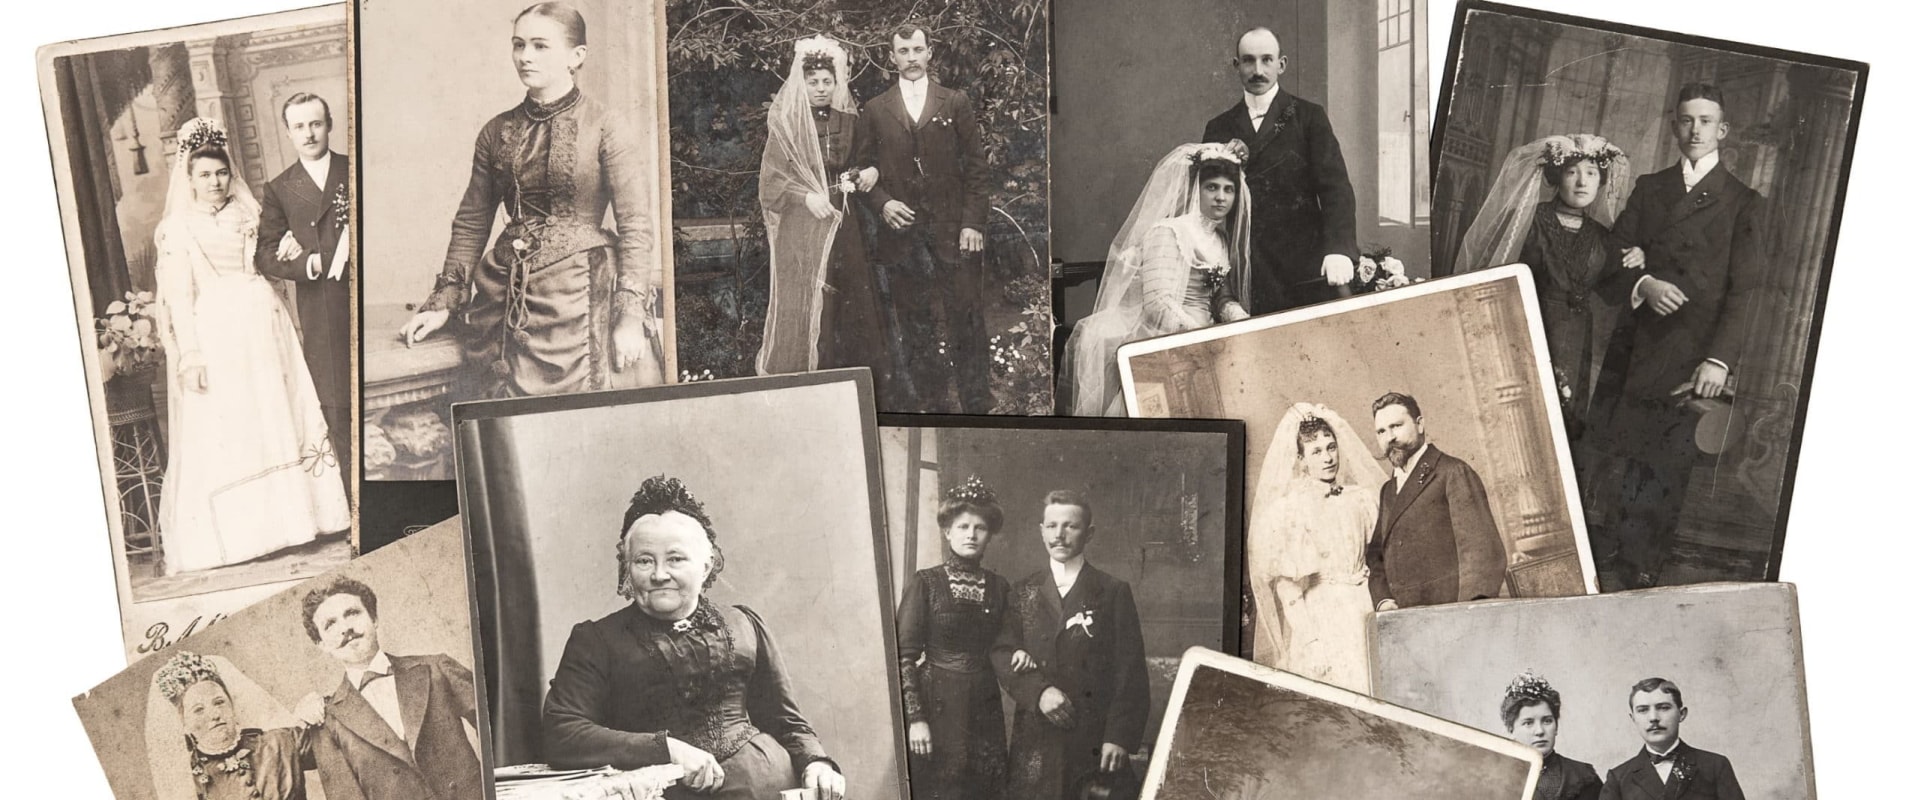 How Much Does it Cost to Research Your Family History?